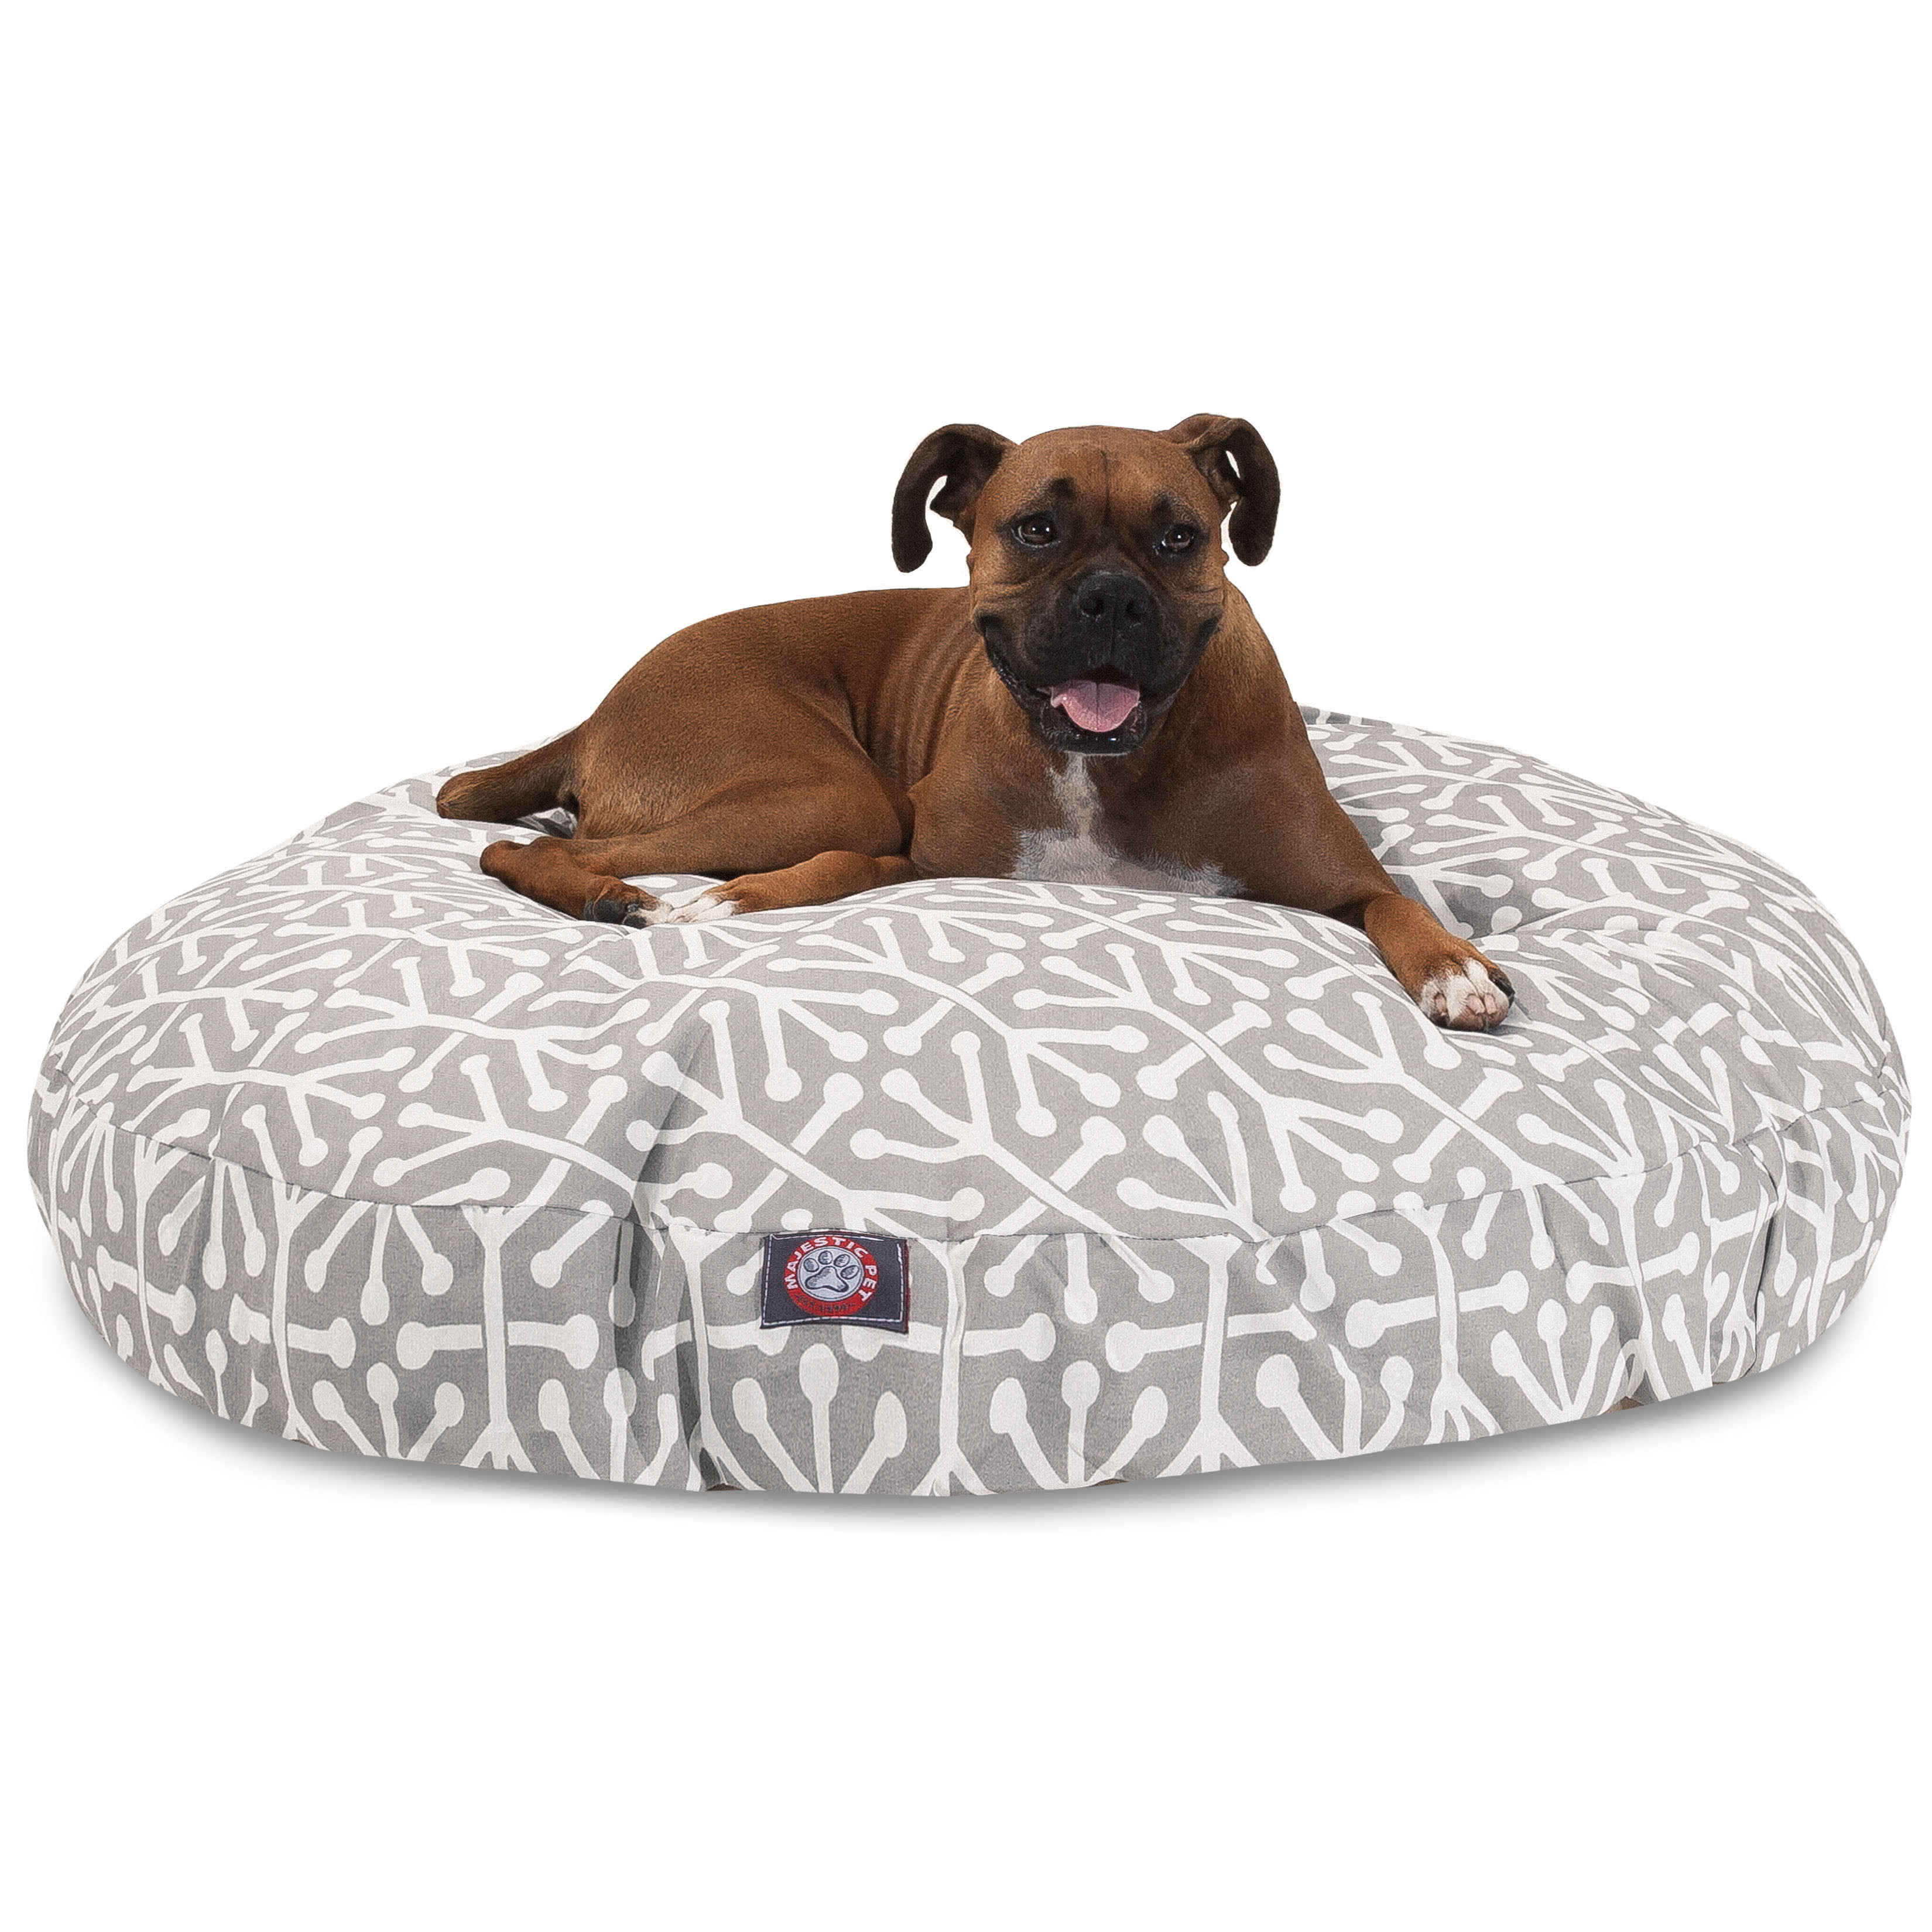 Majestic Pet | Aruba Round Pet Bed For Dogs, Removable Cover, Gray